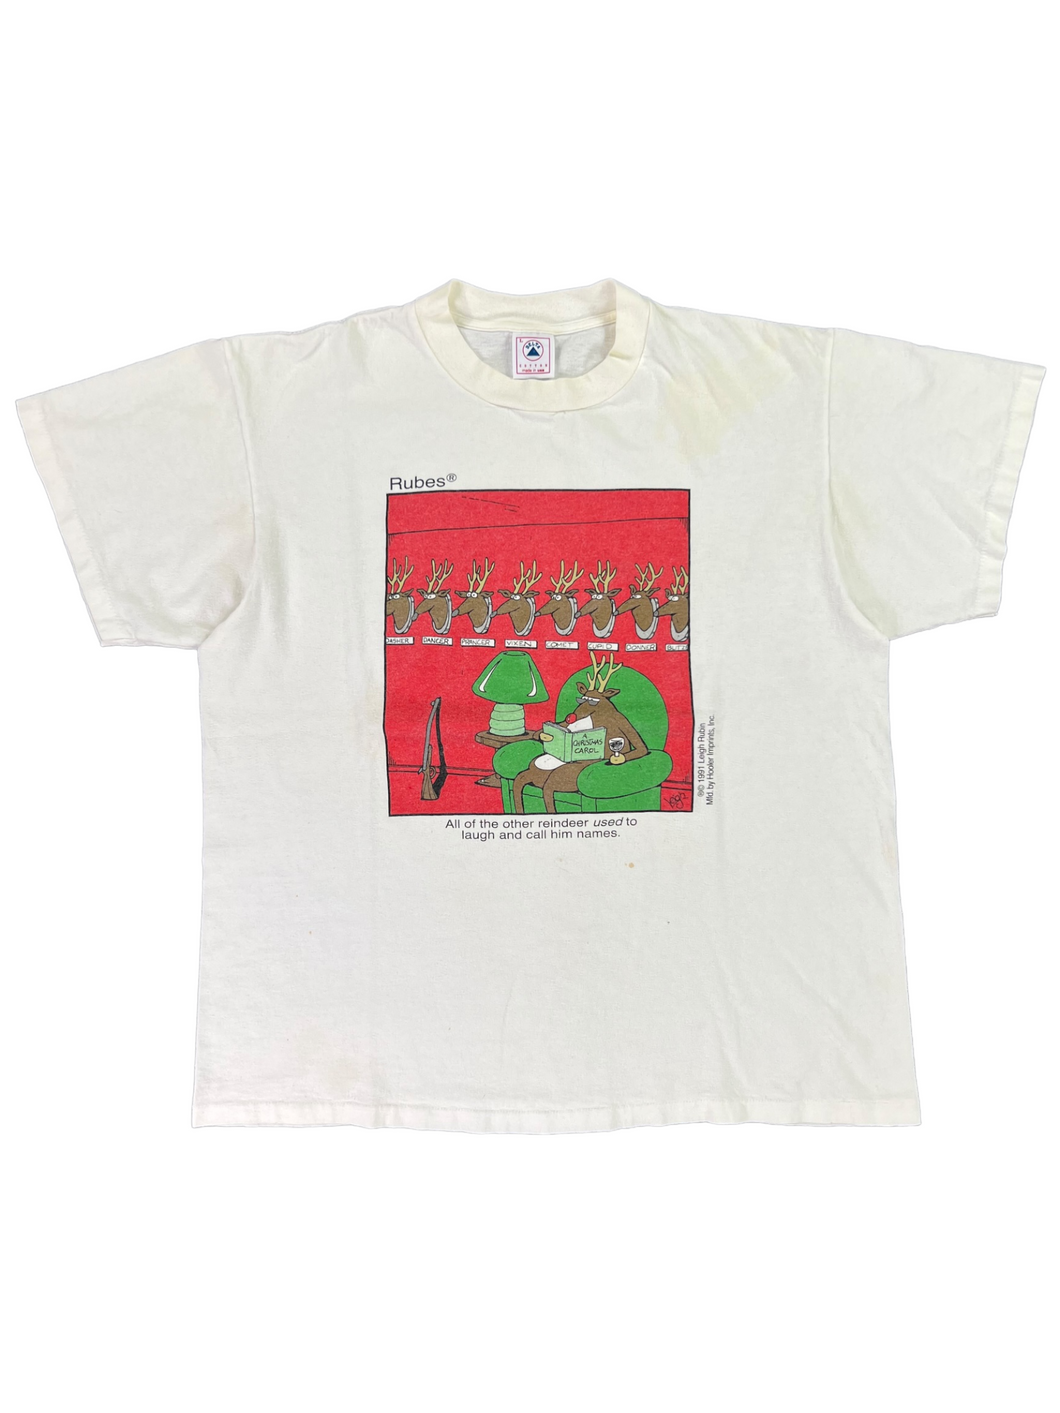 Vintage 1991 All The Other Reindeer USED to laugh and call him names Rudolph tee (L)